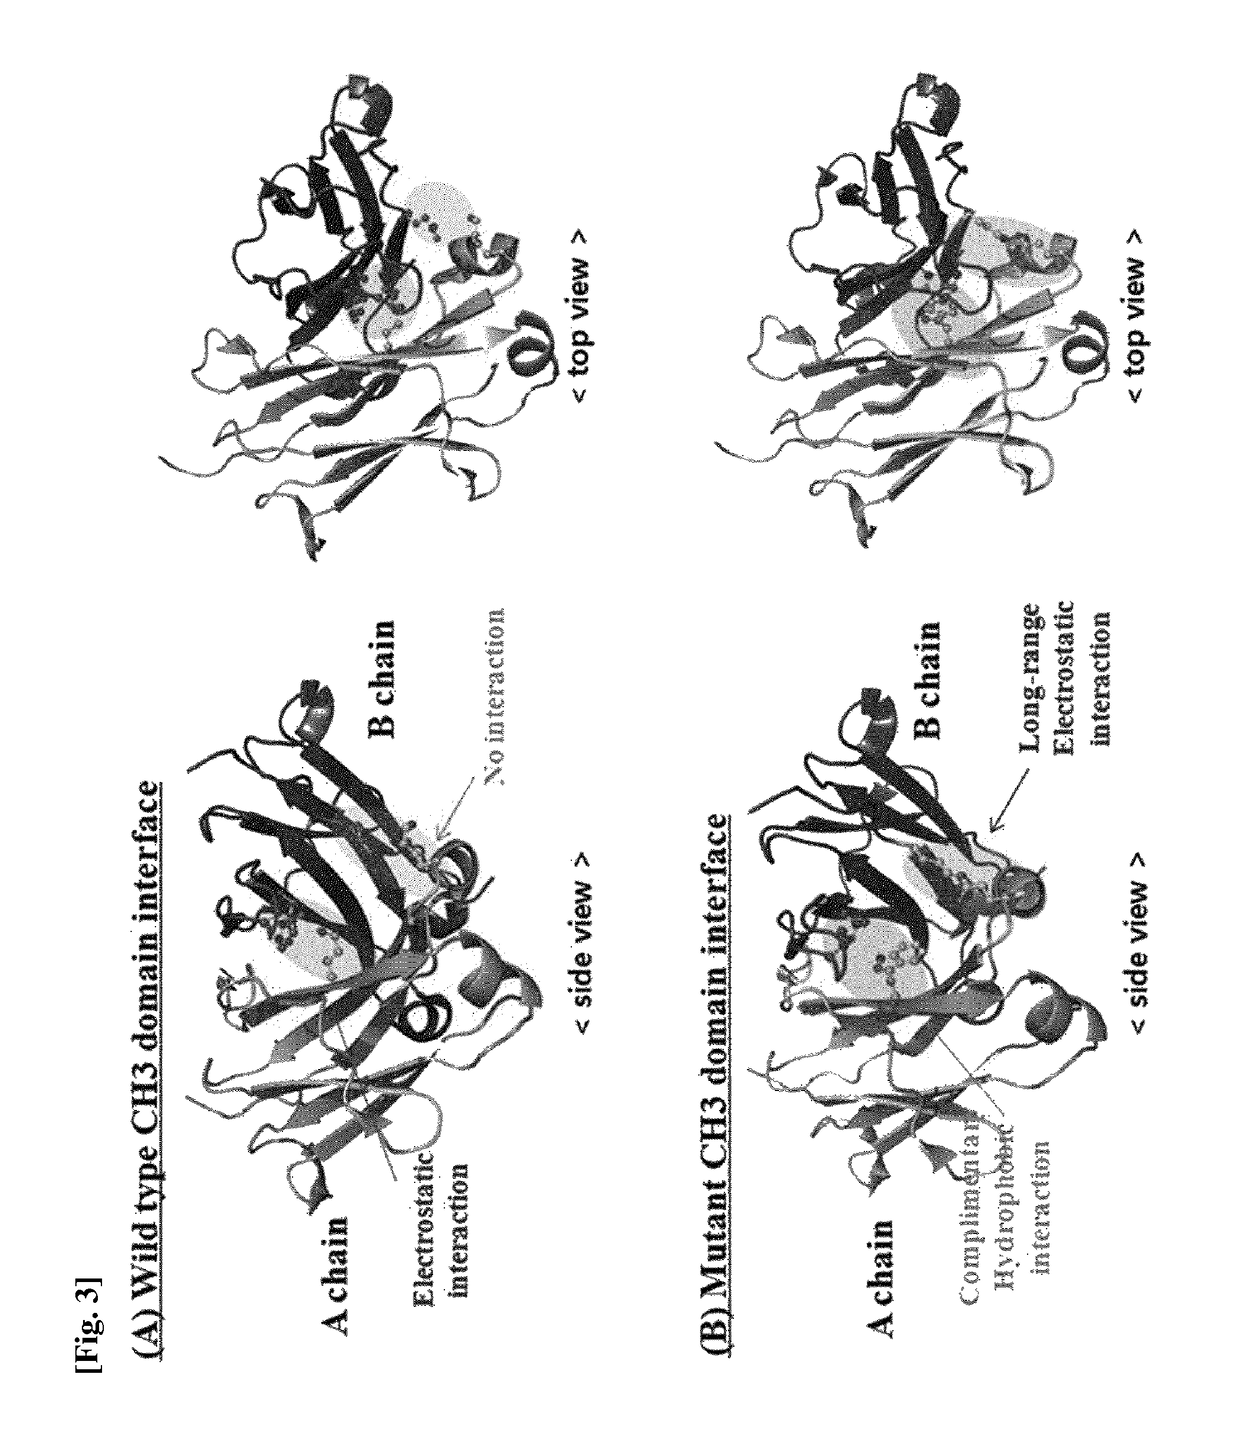 CH3 domain variant pair inducing formation of heterodimer of heavy chain constant region of antibody at high efficiency, method for preparing same, and use thereof